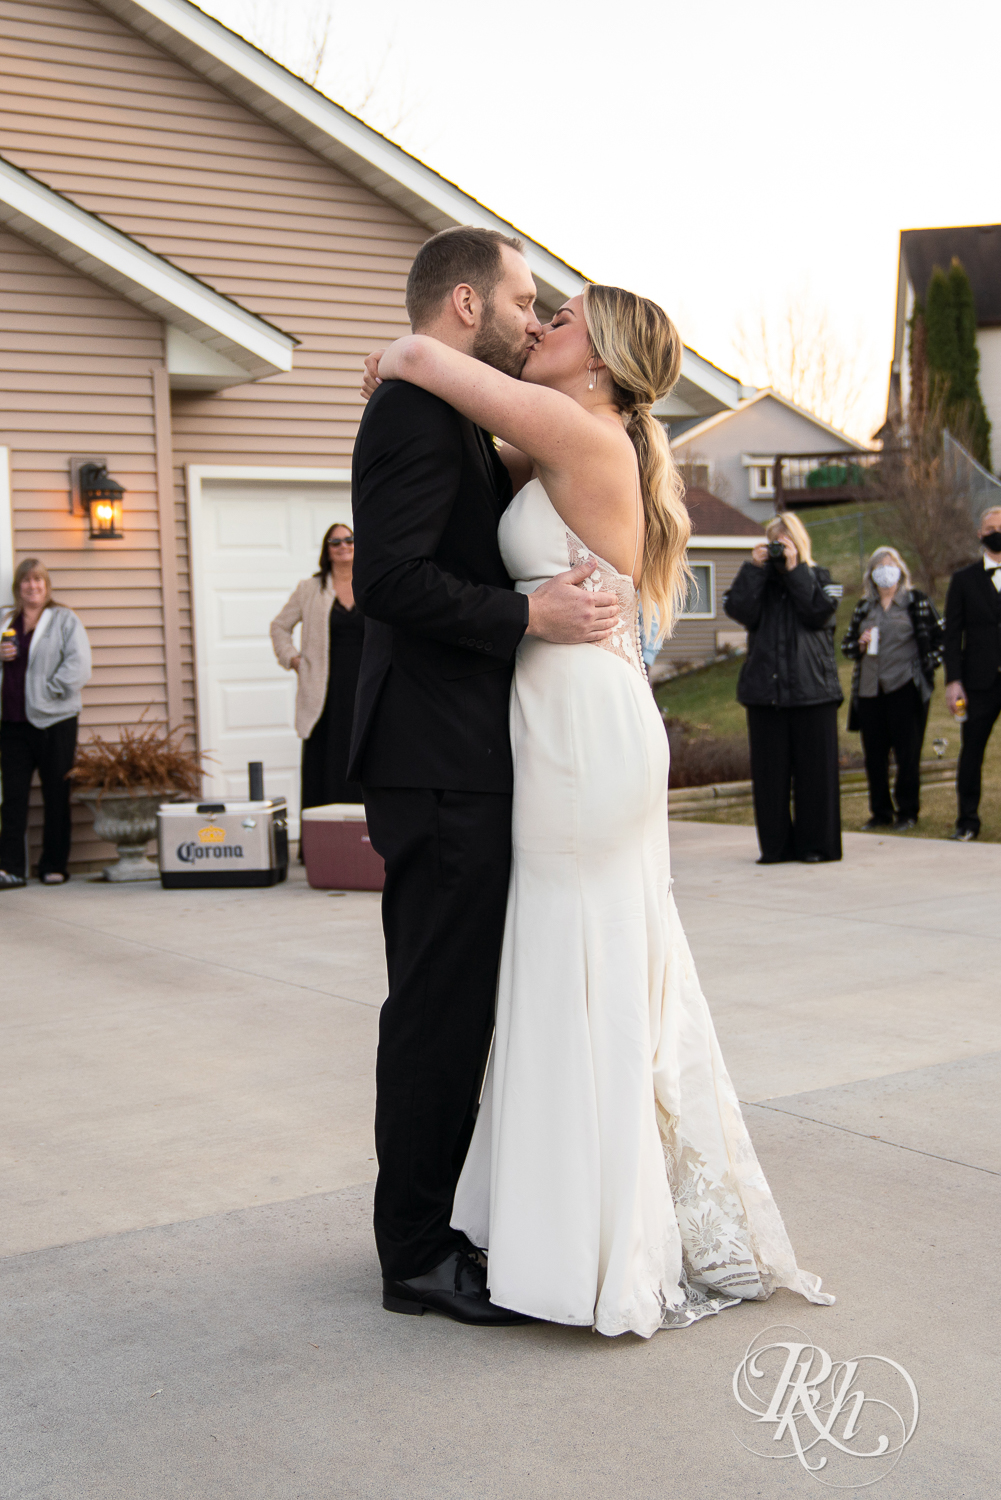 Bride and groom share first dance during sunset in their driveway in Eagan, Minnesota.